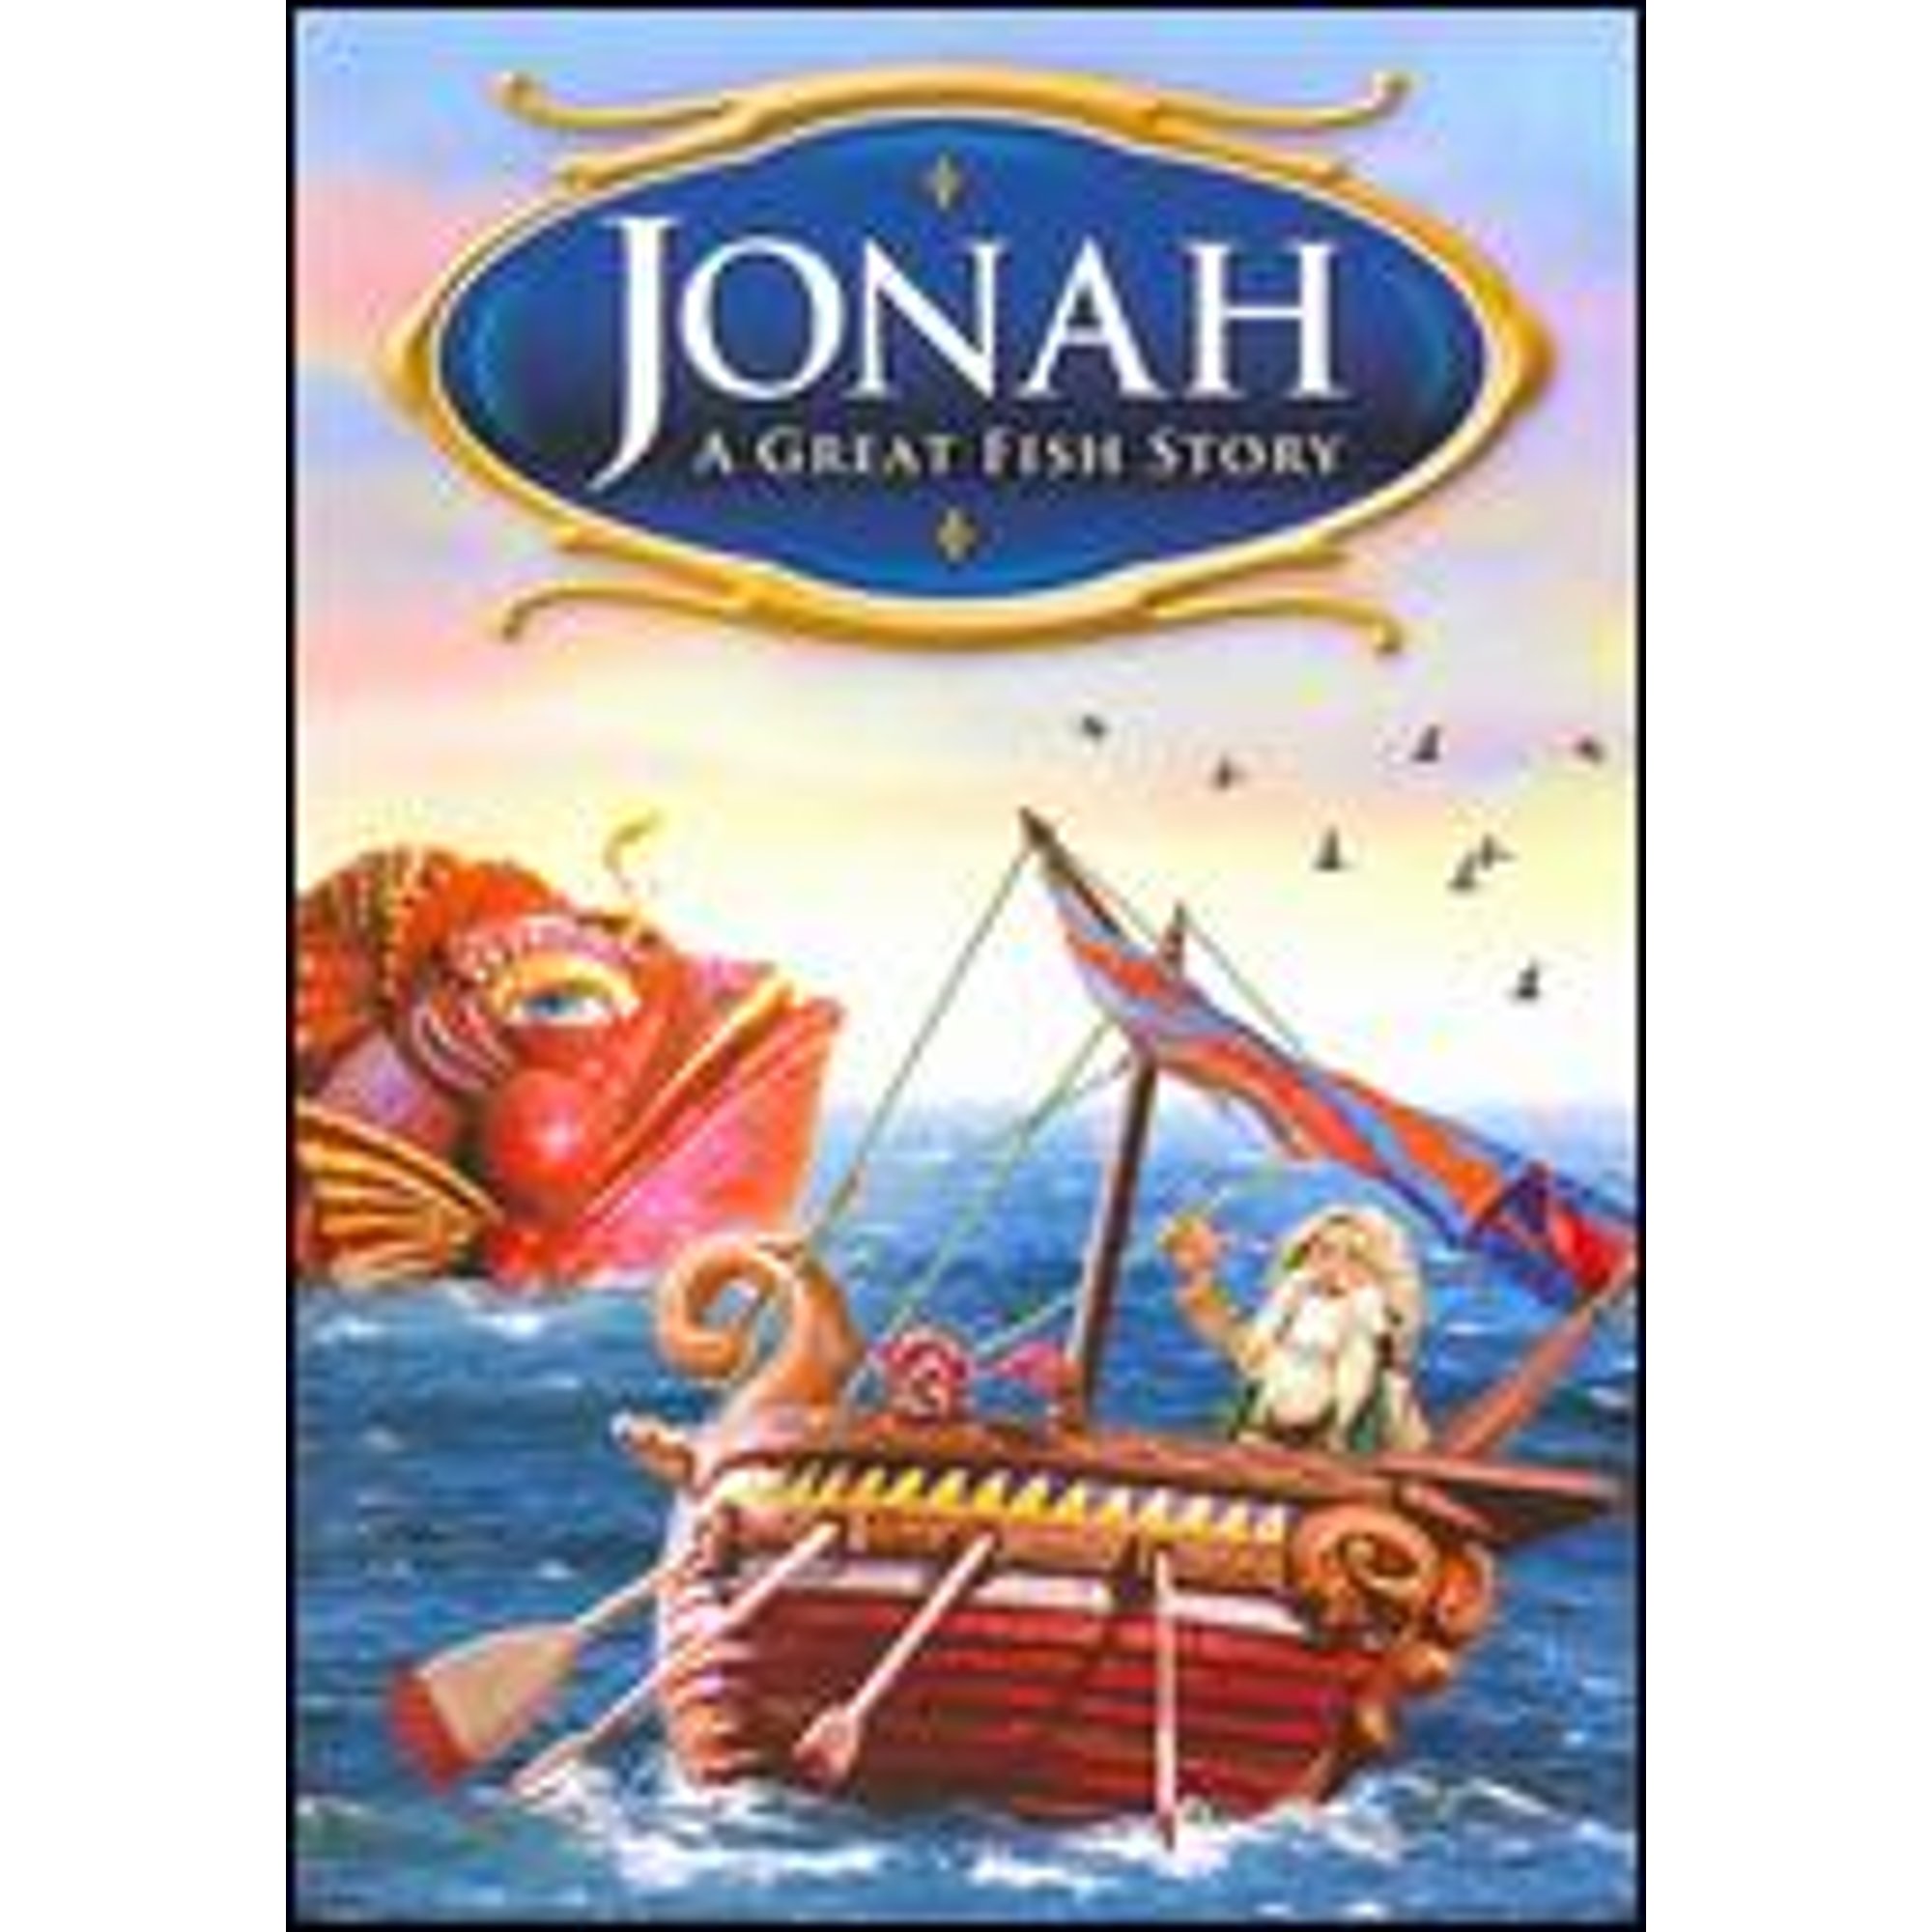 jonah: a great fish story - image 1 of 2